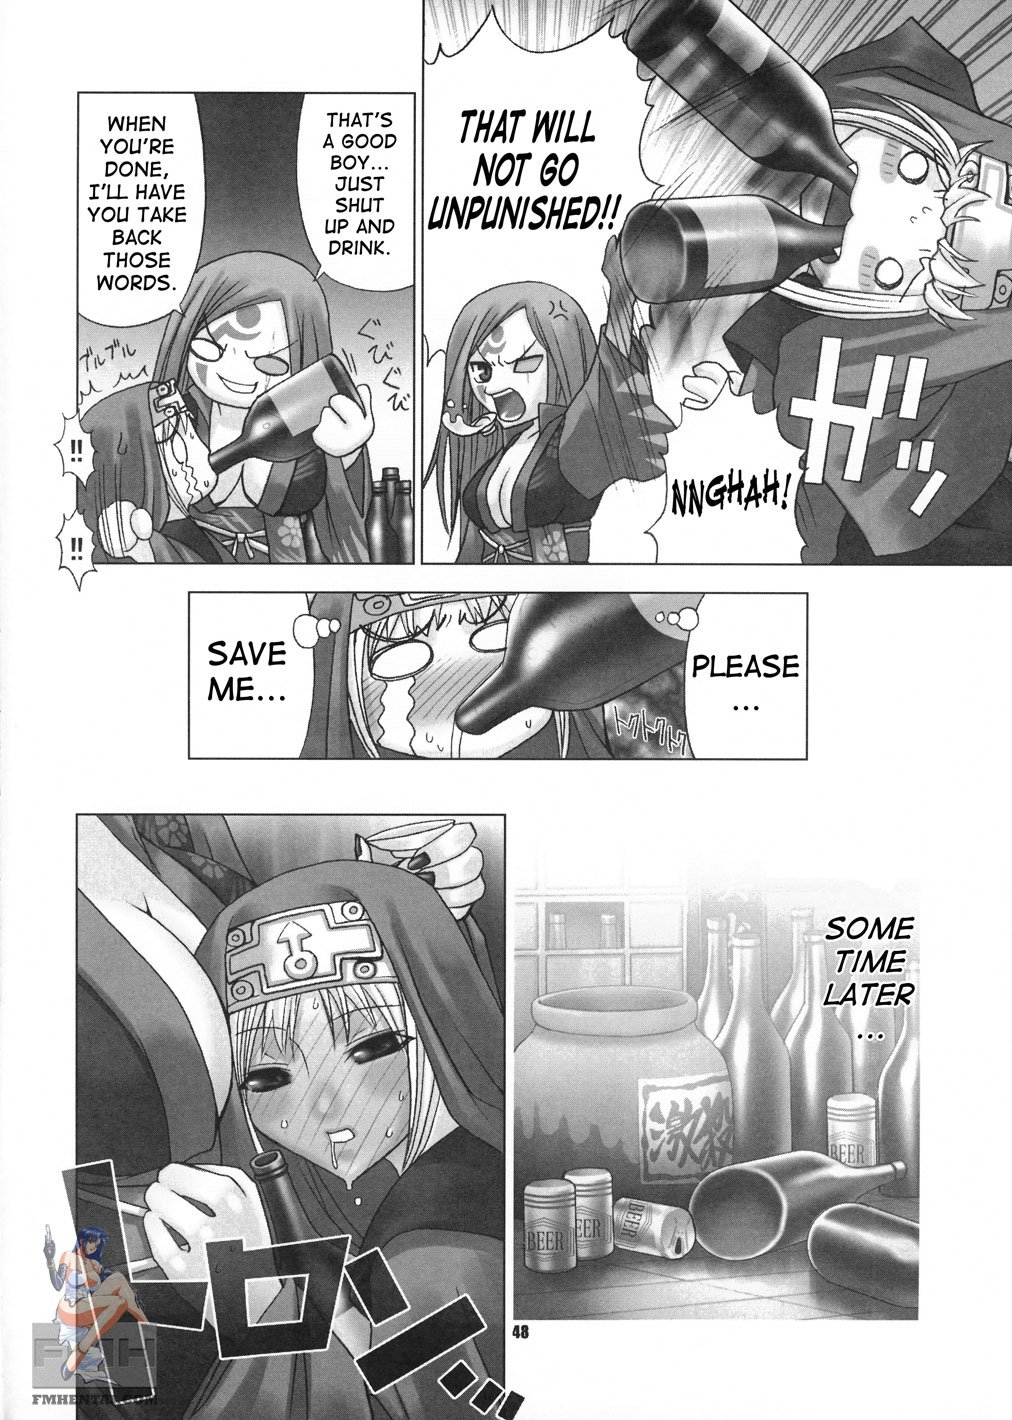 [RUNNERS HIGH (Chiba Toshirou)] Chaos Step 3 2004 Winter Soushuuhen (GUILTY GEAR XX The Midnight Carnival) [English] page 46 full